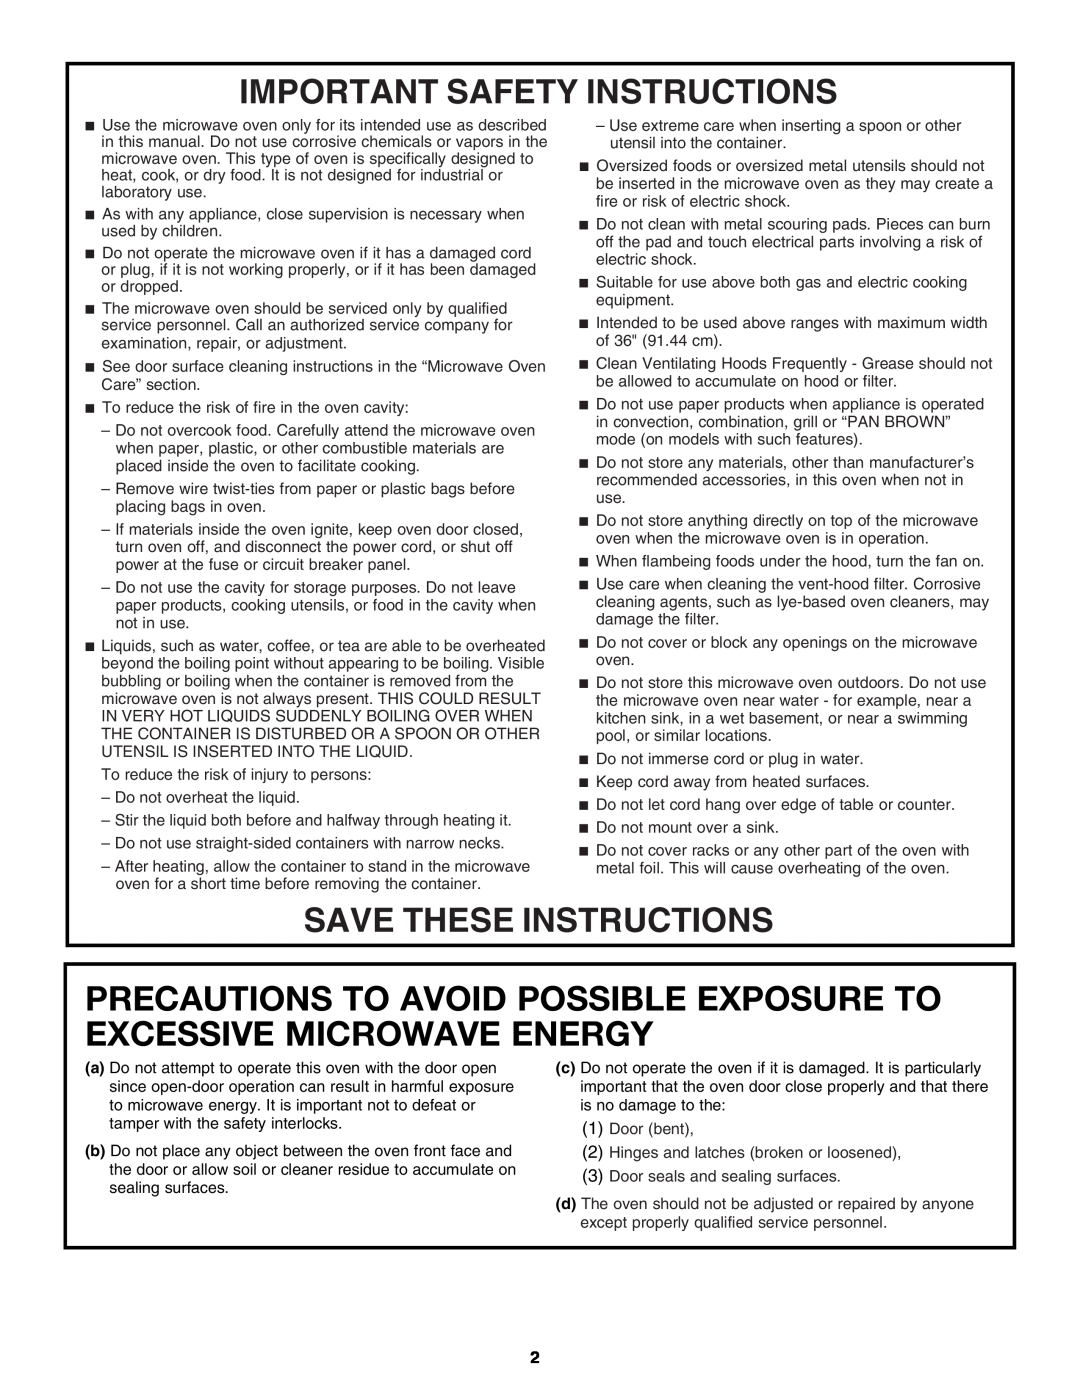 Maytag W10249248A Precautions To Avoid Possible Exposure To Excessive Microwave Energy, Important Safety Instructions 